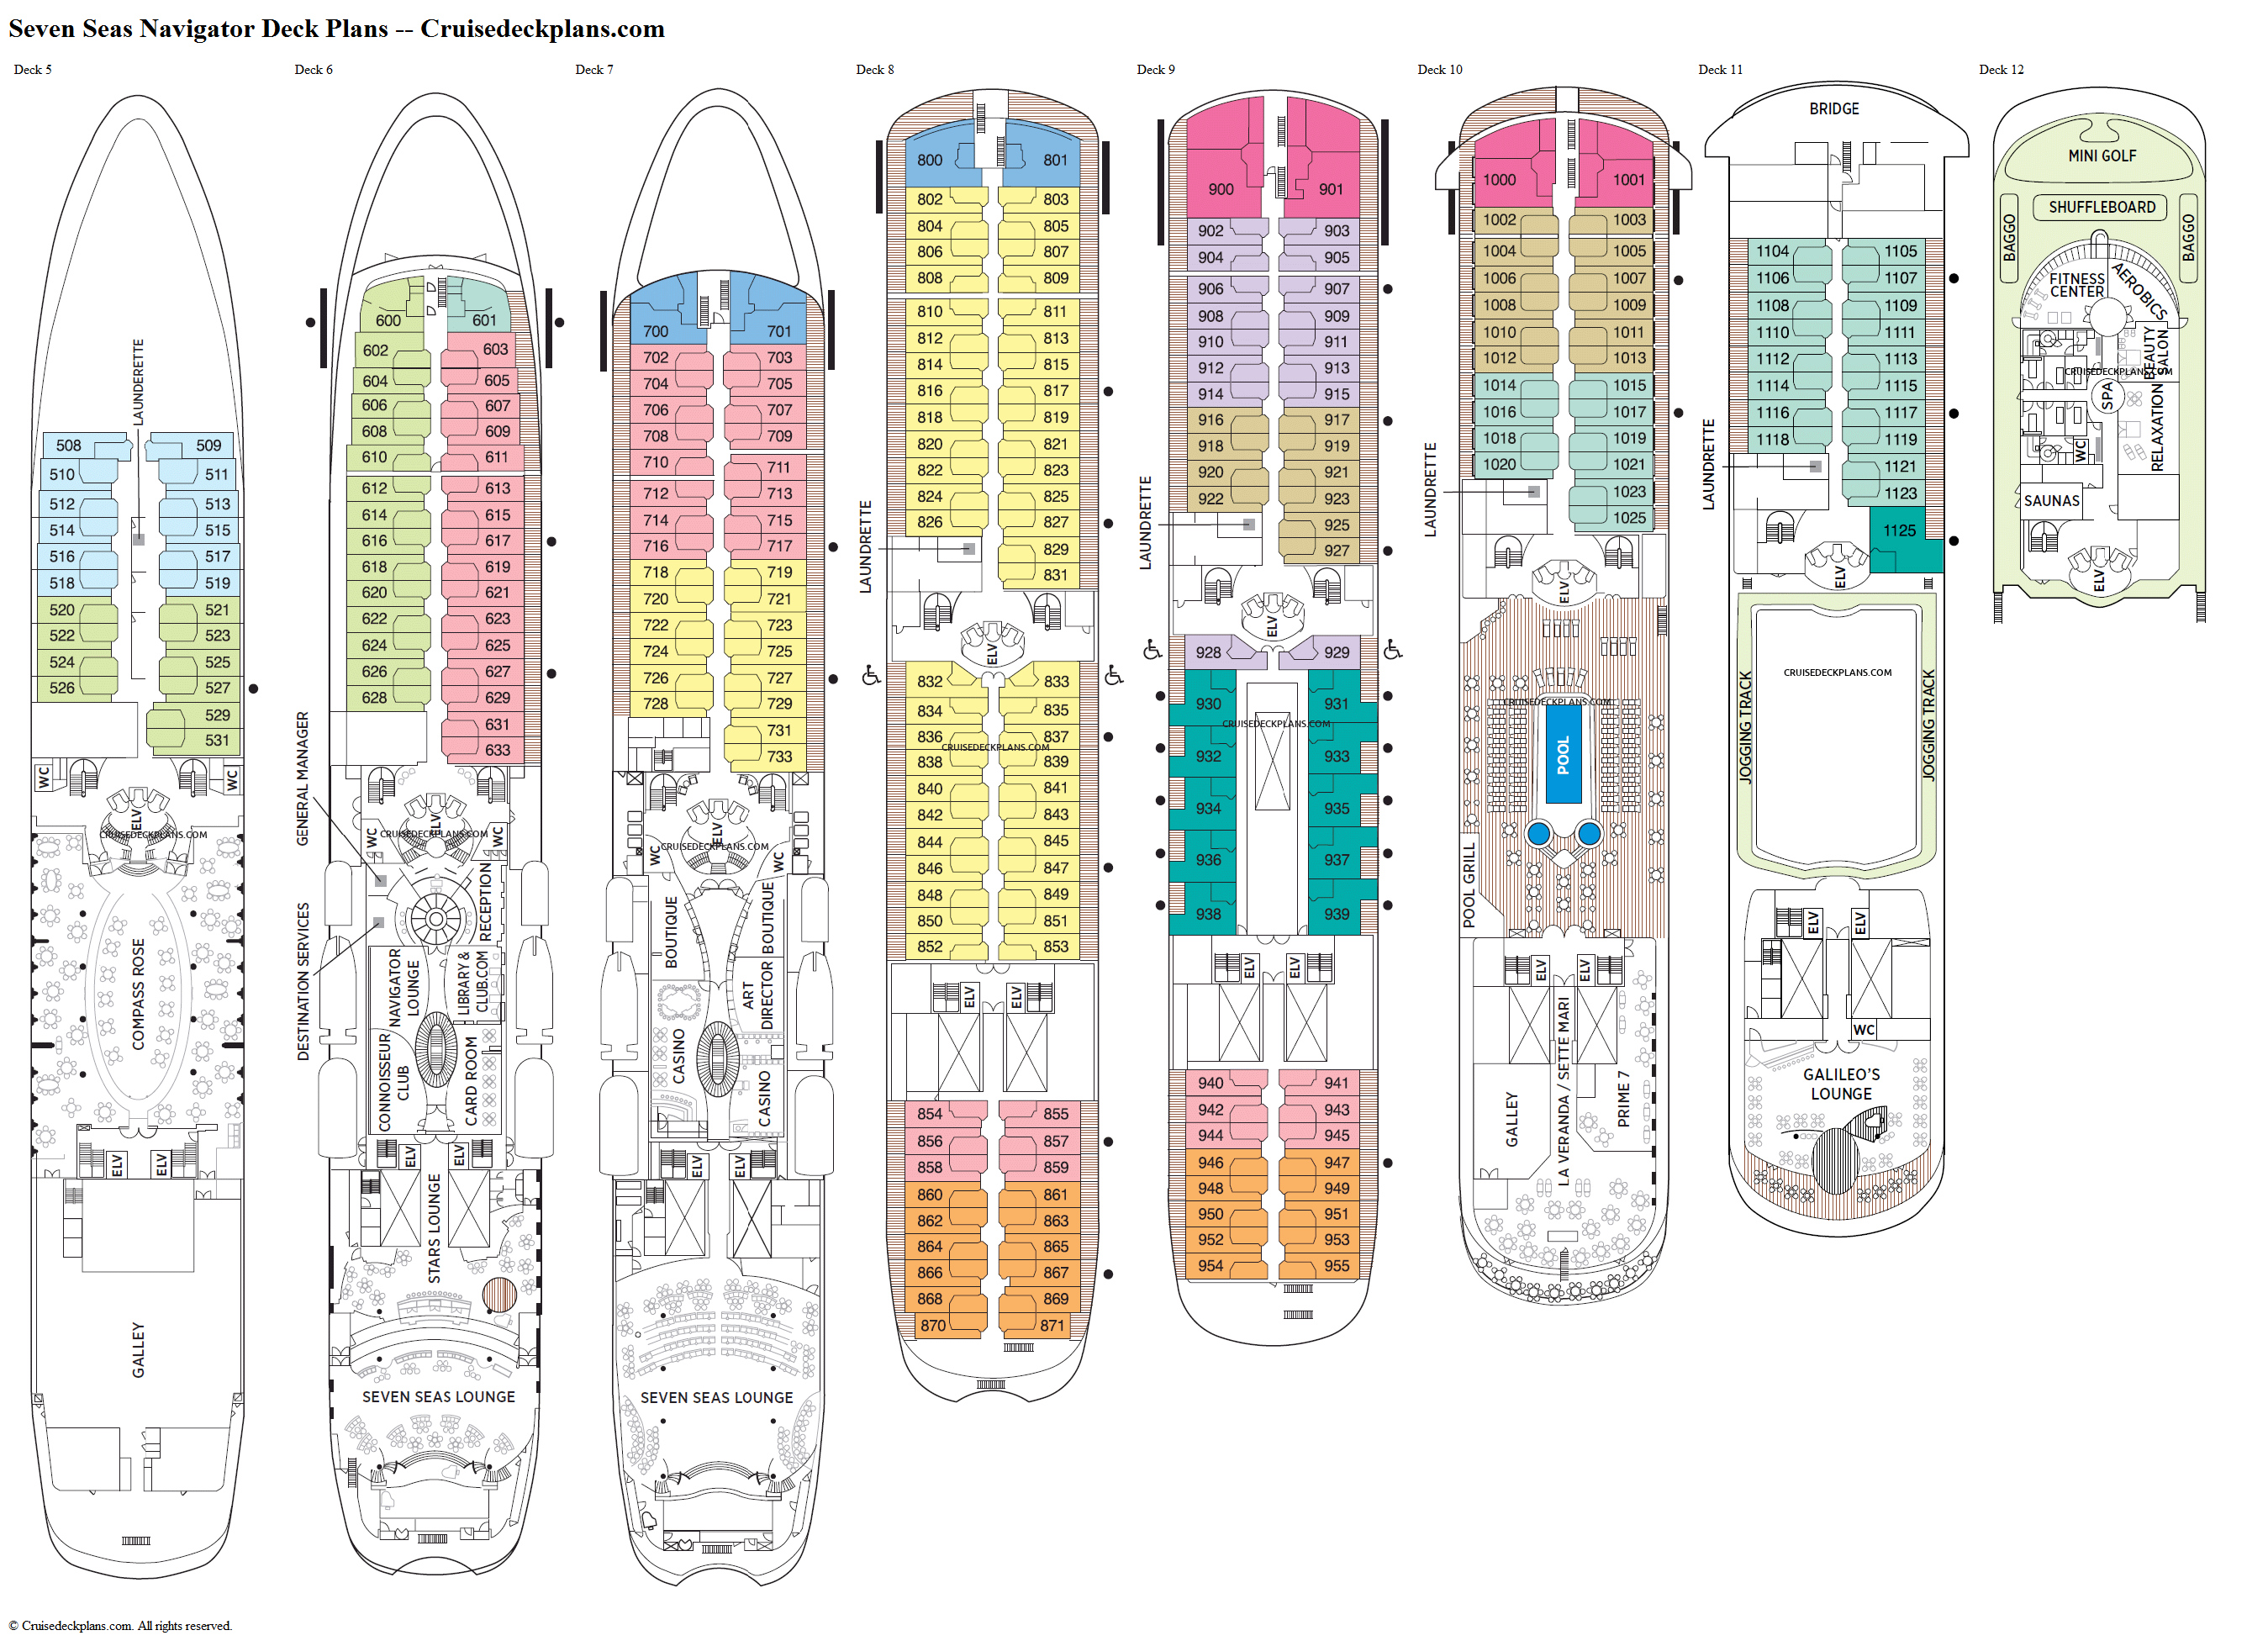 Odyssey Of The Seas Cruise Ship Deck Plans